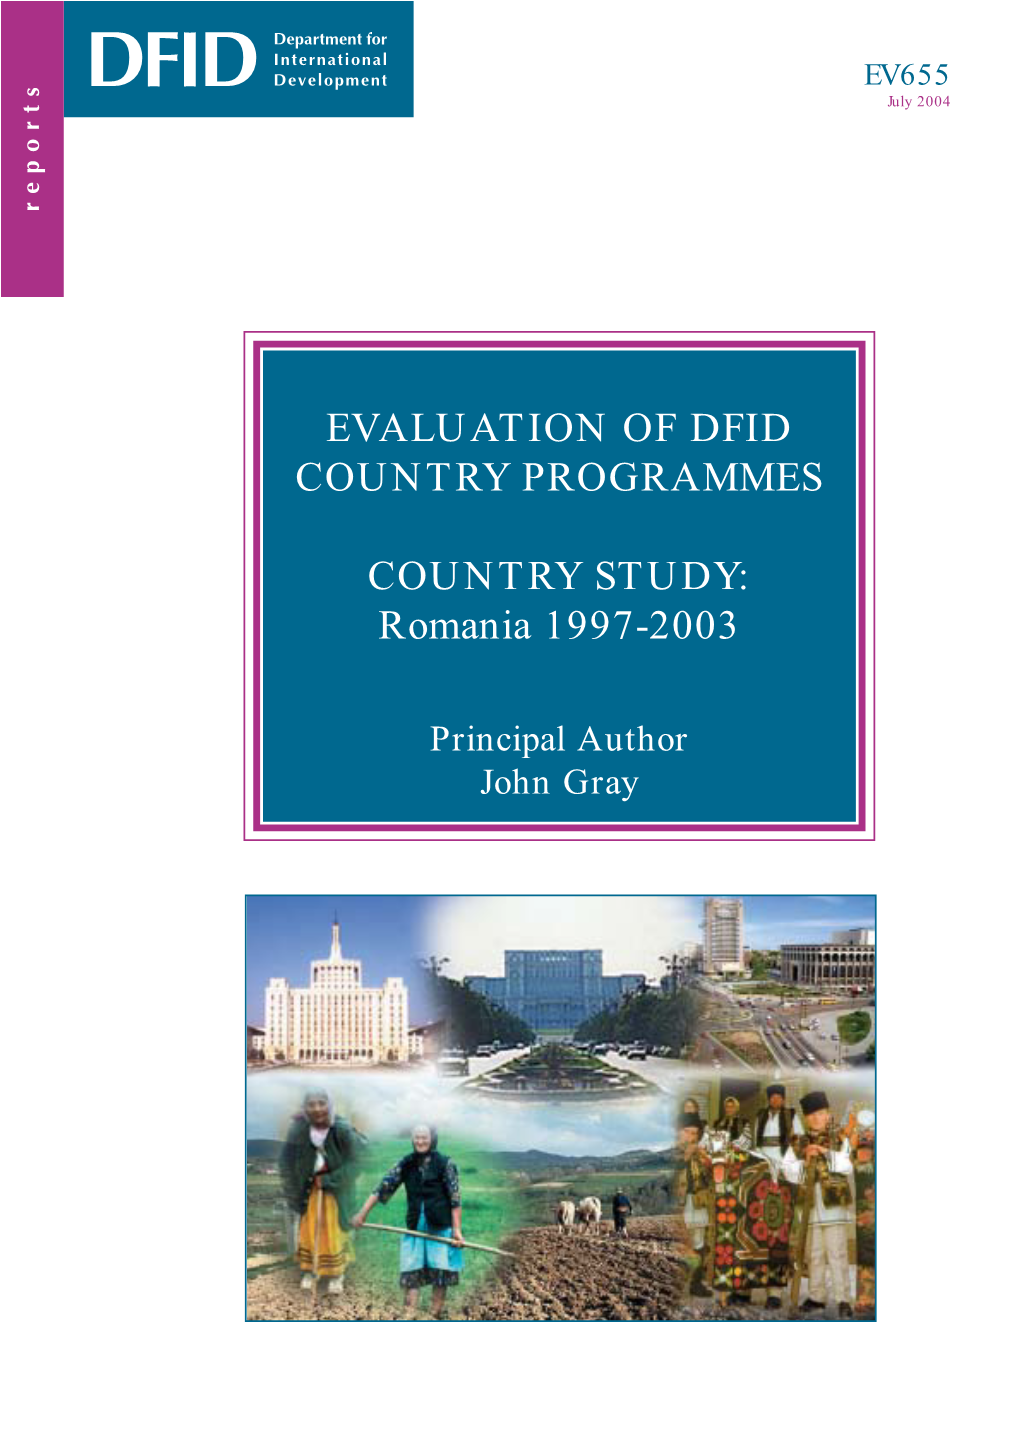 Evaluation of DFID Country Programme, Romania 1997-2003